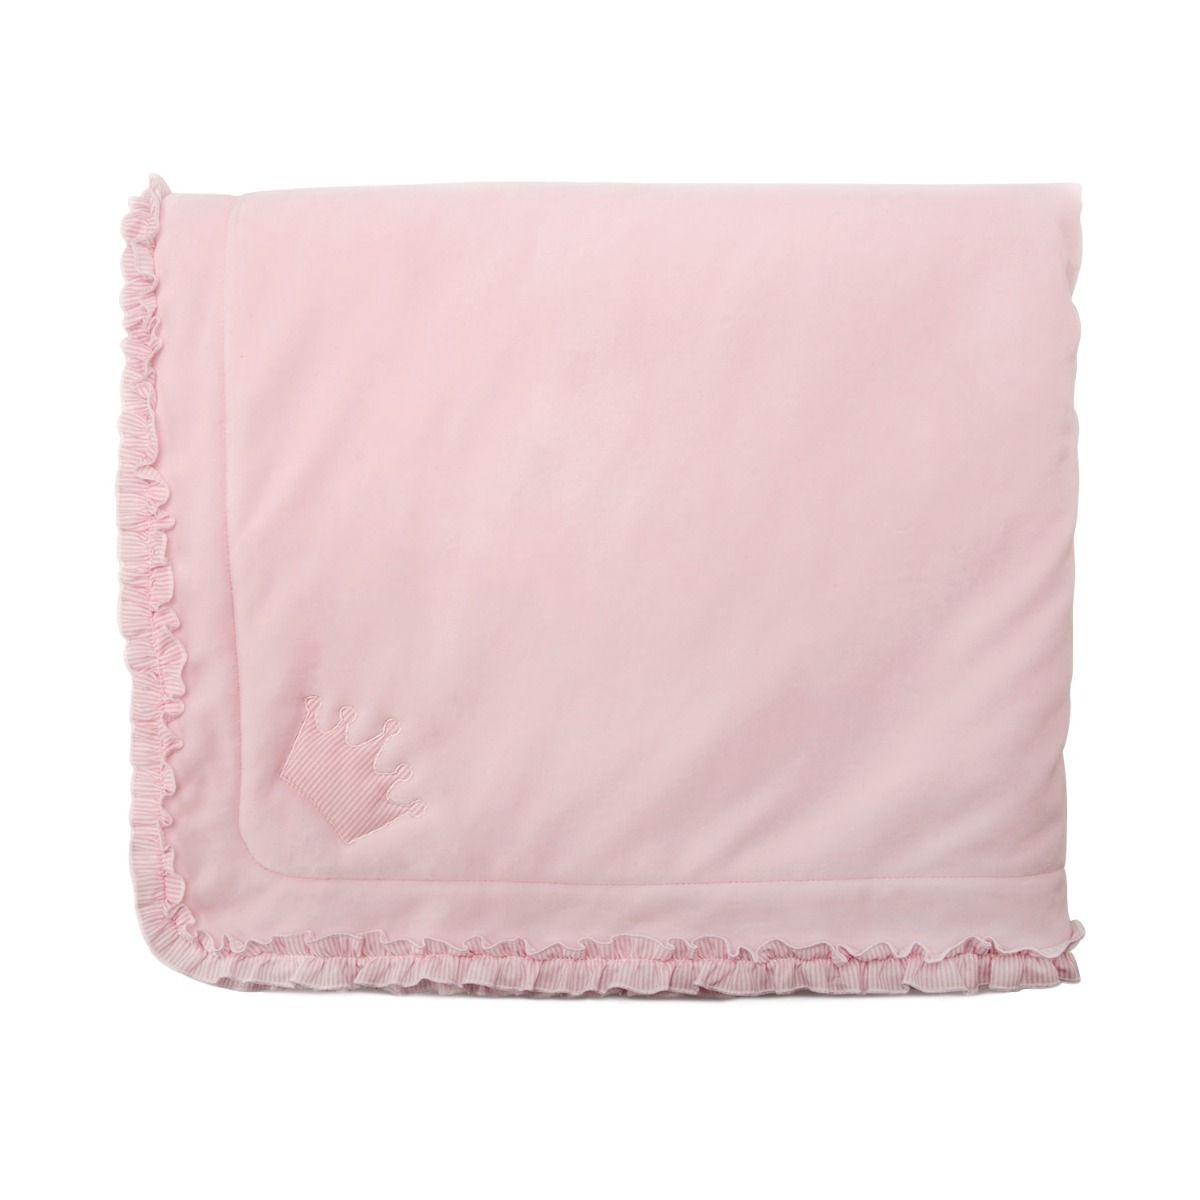 Gentle pink cotton blanket with embroidered crown and frills around.